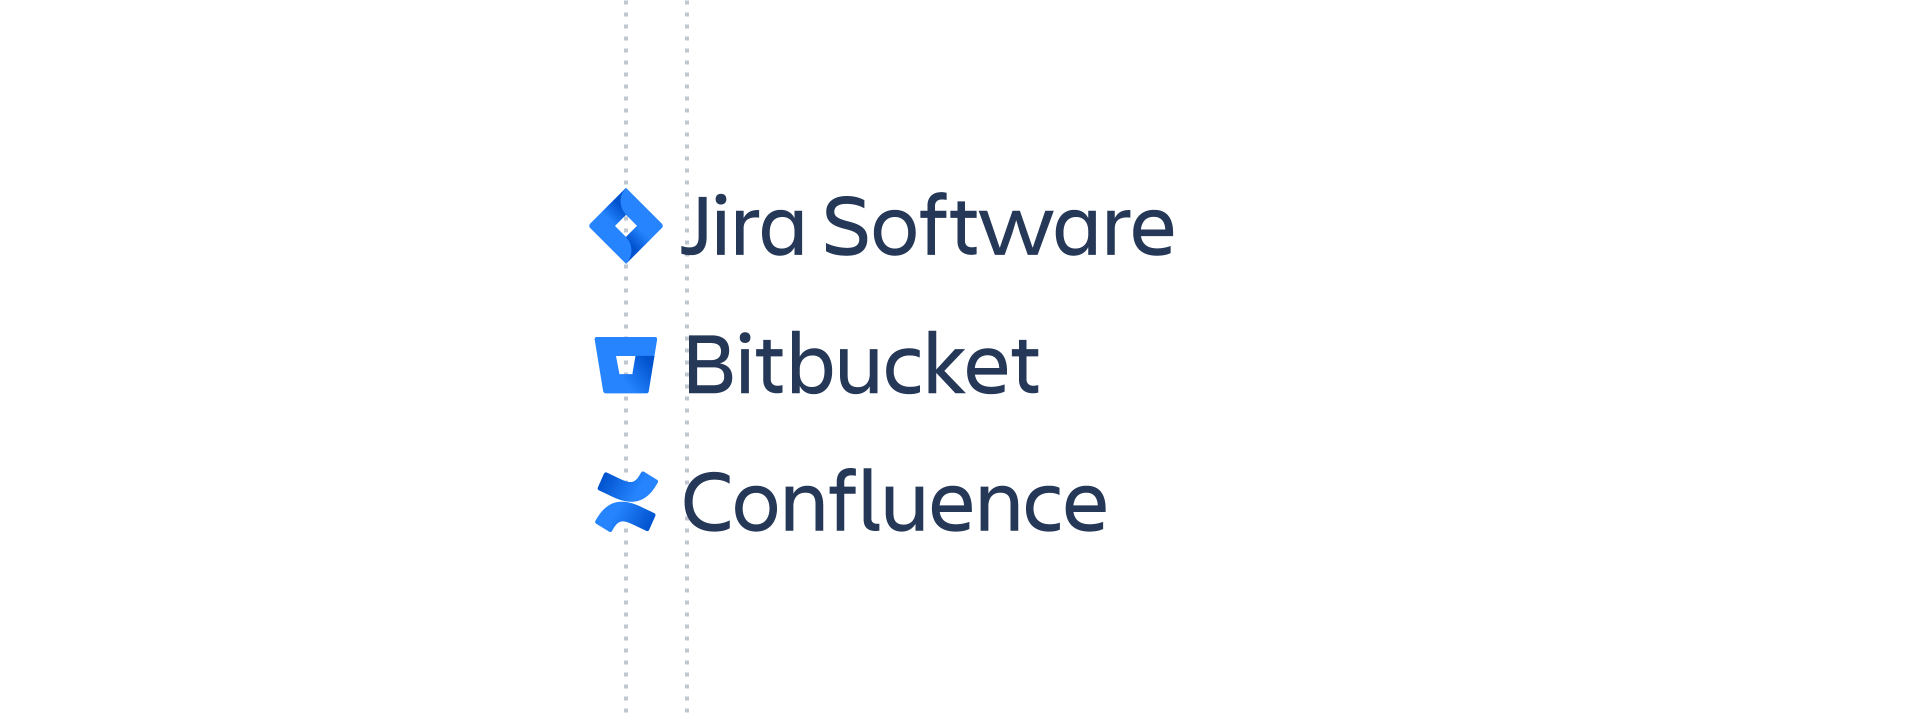 Vertical product alignment for Jira Software, Bitbucket and Confluence logos. 